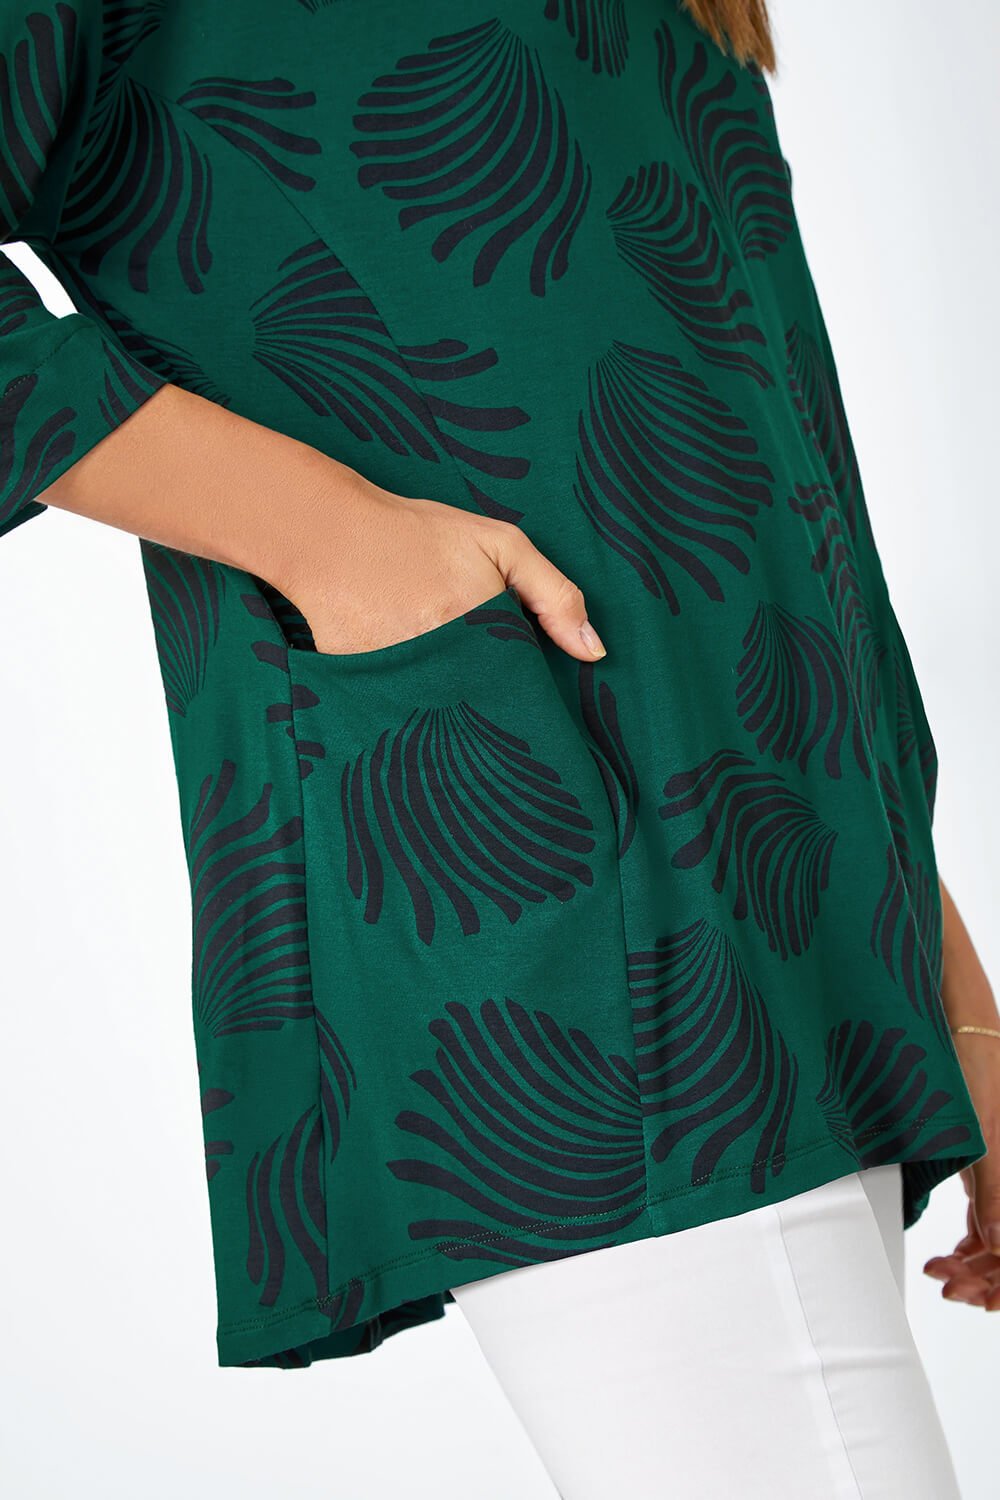 Green Abstract Print Pocket Tunic Stretch Top, Image 5 of 5